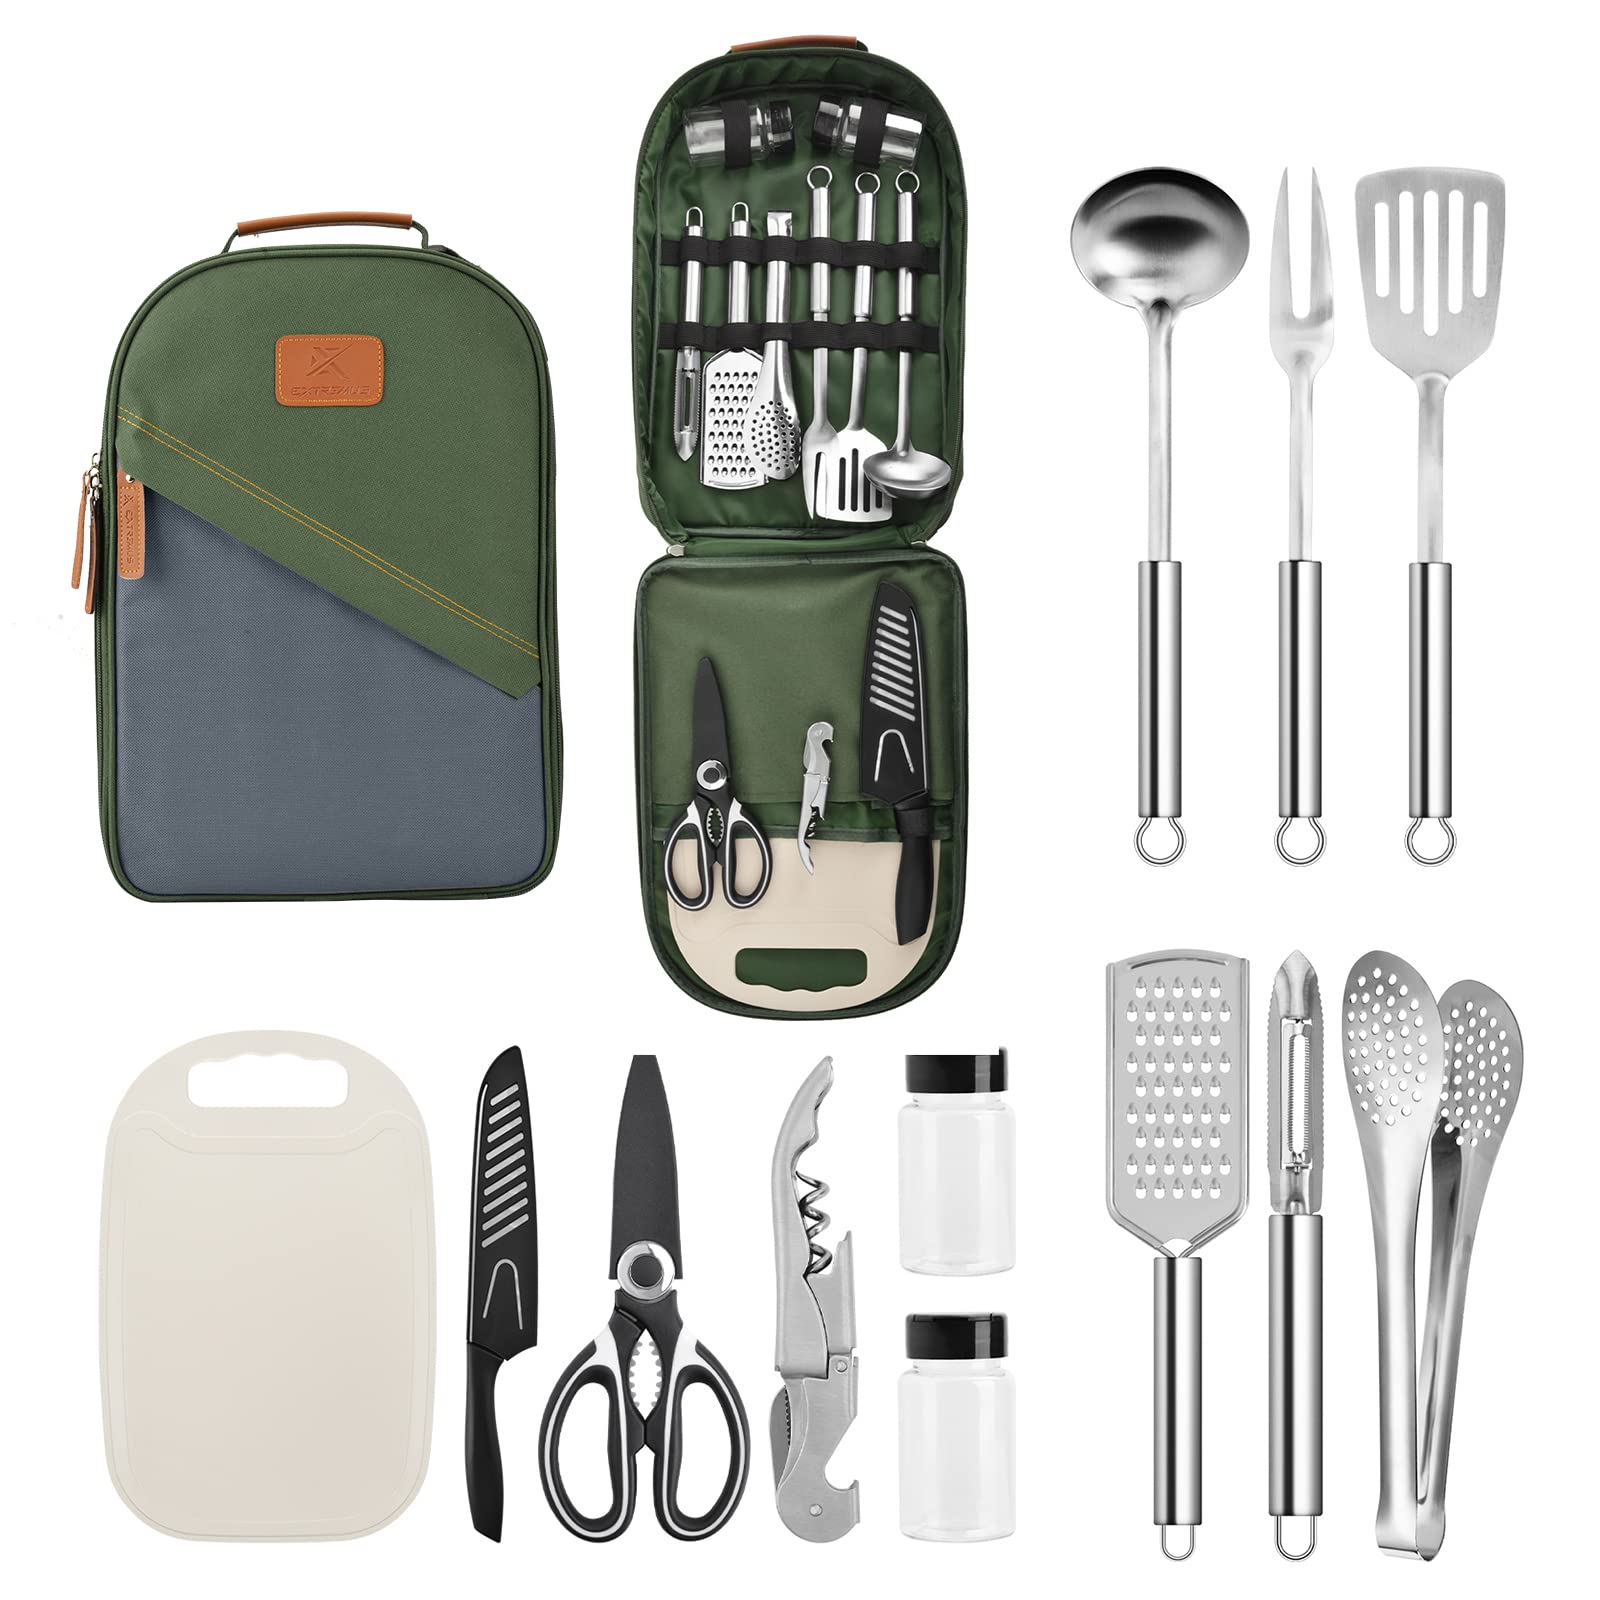 BeryLove Camping Cooking Utensils Set Camping BBQ Cookware Stainless Steel  Grill Tools Gear and Equipment for Travel Tenting Kitchen Essentials